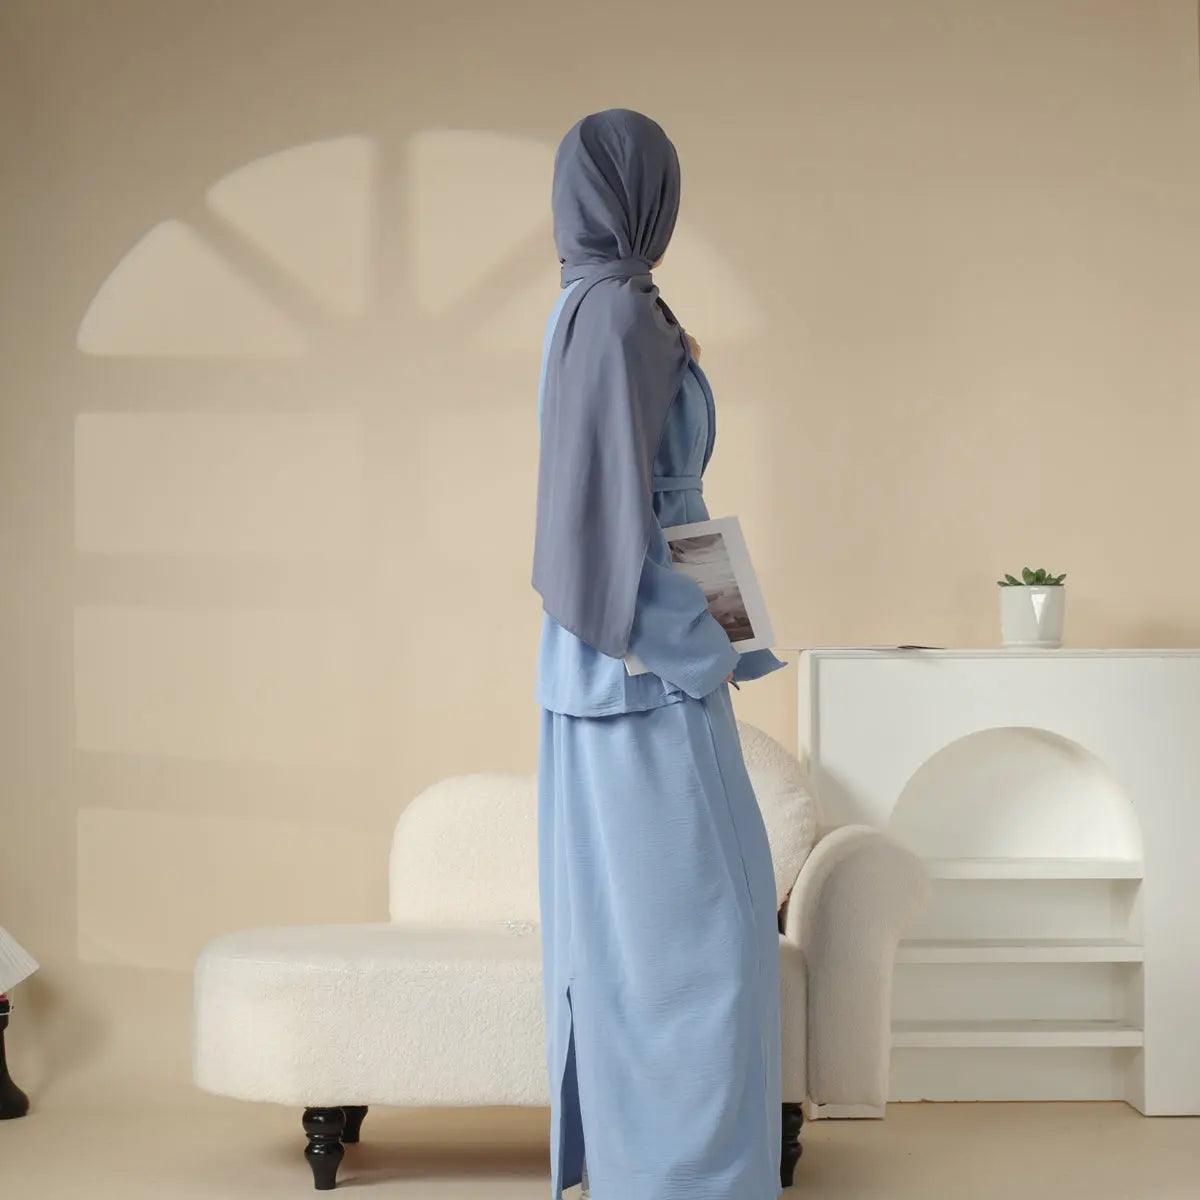 MOA022 Long Sleeve Dress Top and Skirt Suit - Mariam's Collection